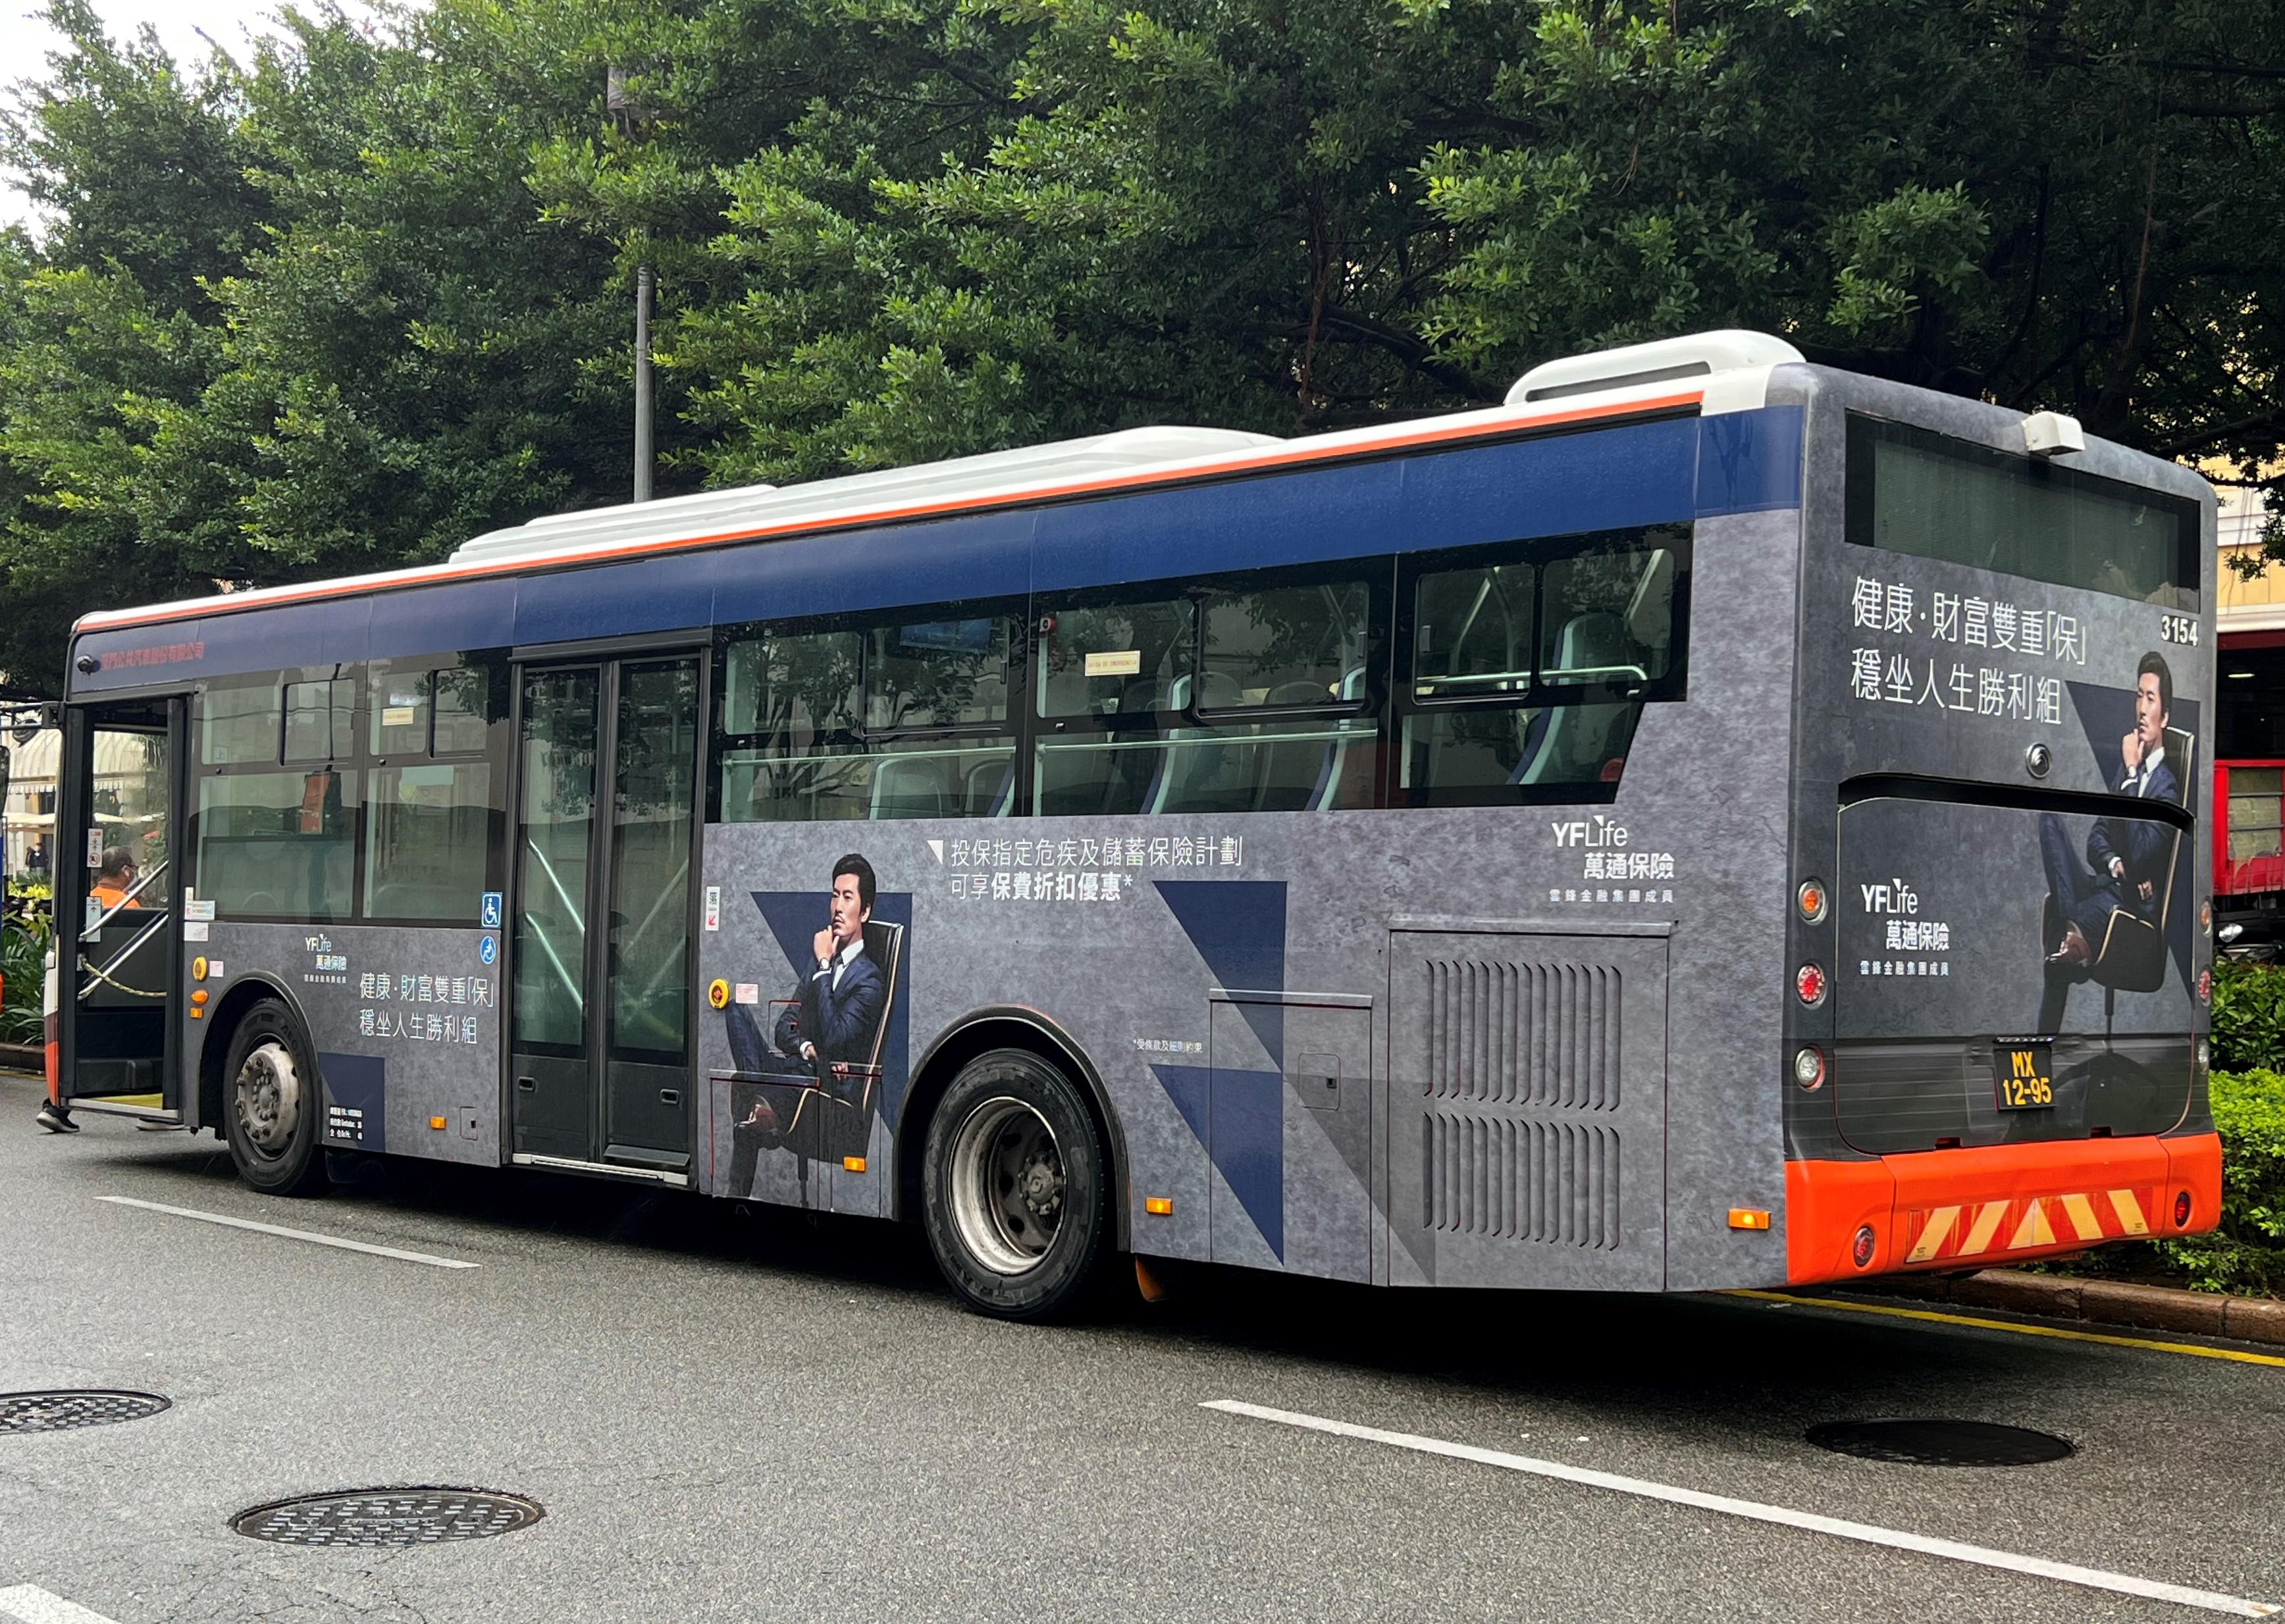 The YF Life advertising campaign on buses in Macau exudes the brand’s positive spirit.